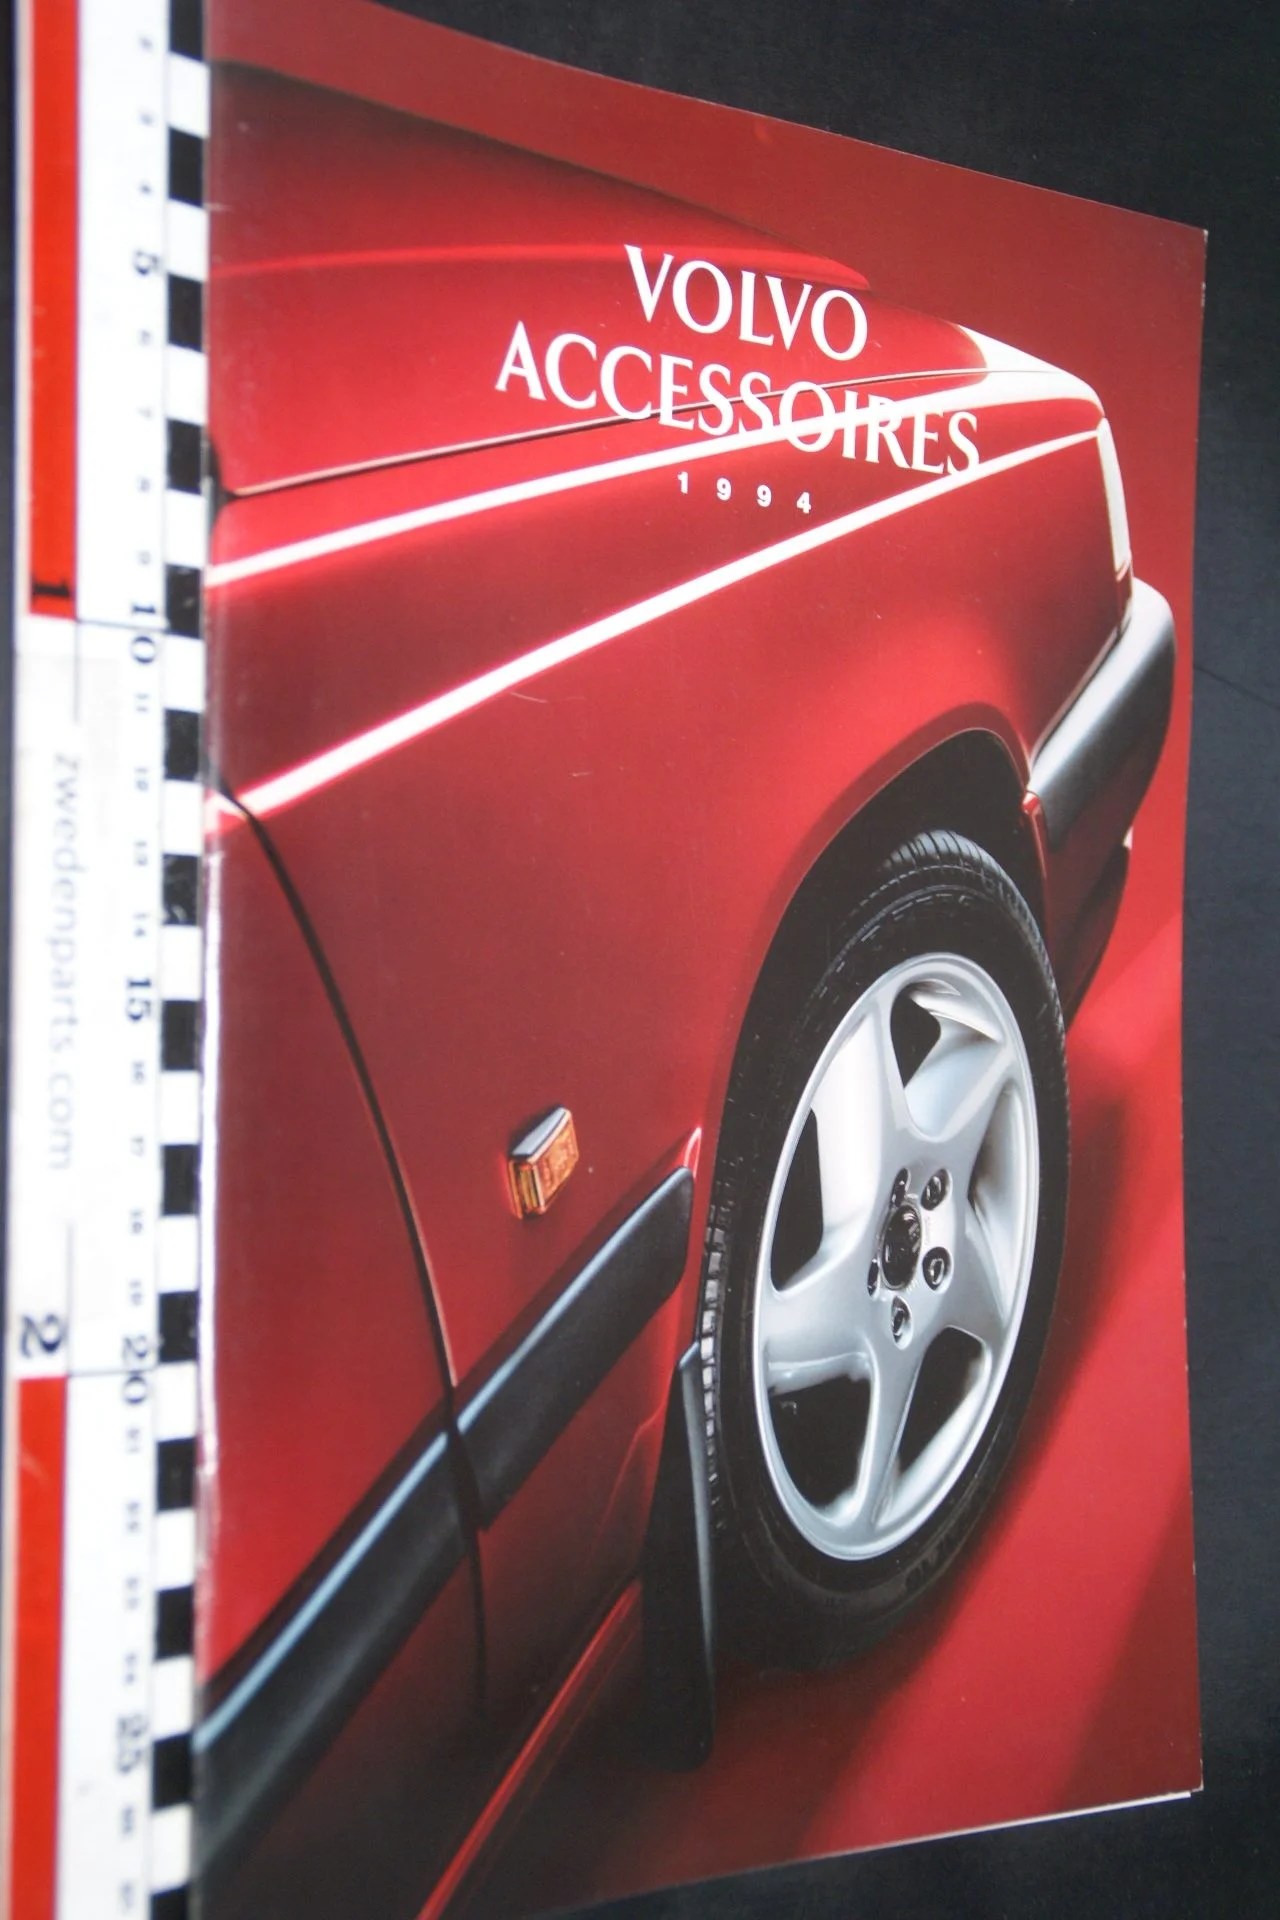 DSC03884 1993 brochure Volvo accessoires RSP 572 30291 rotated